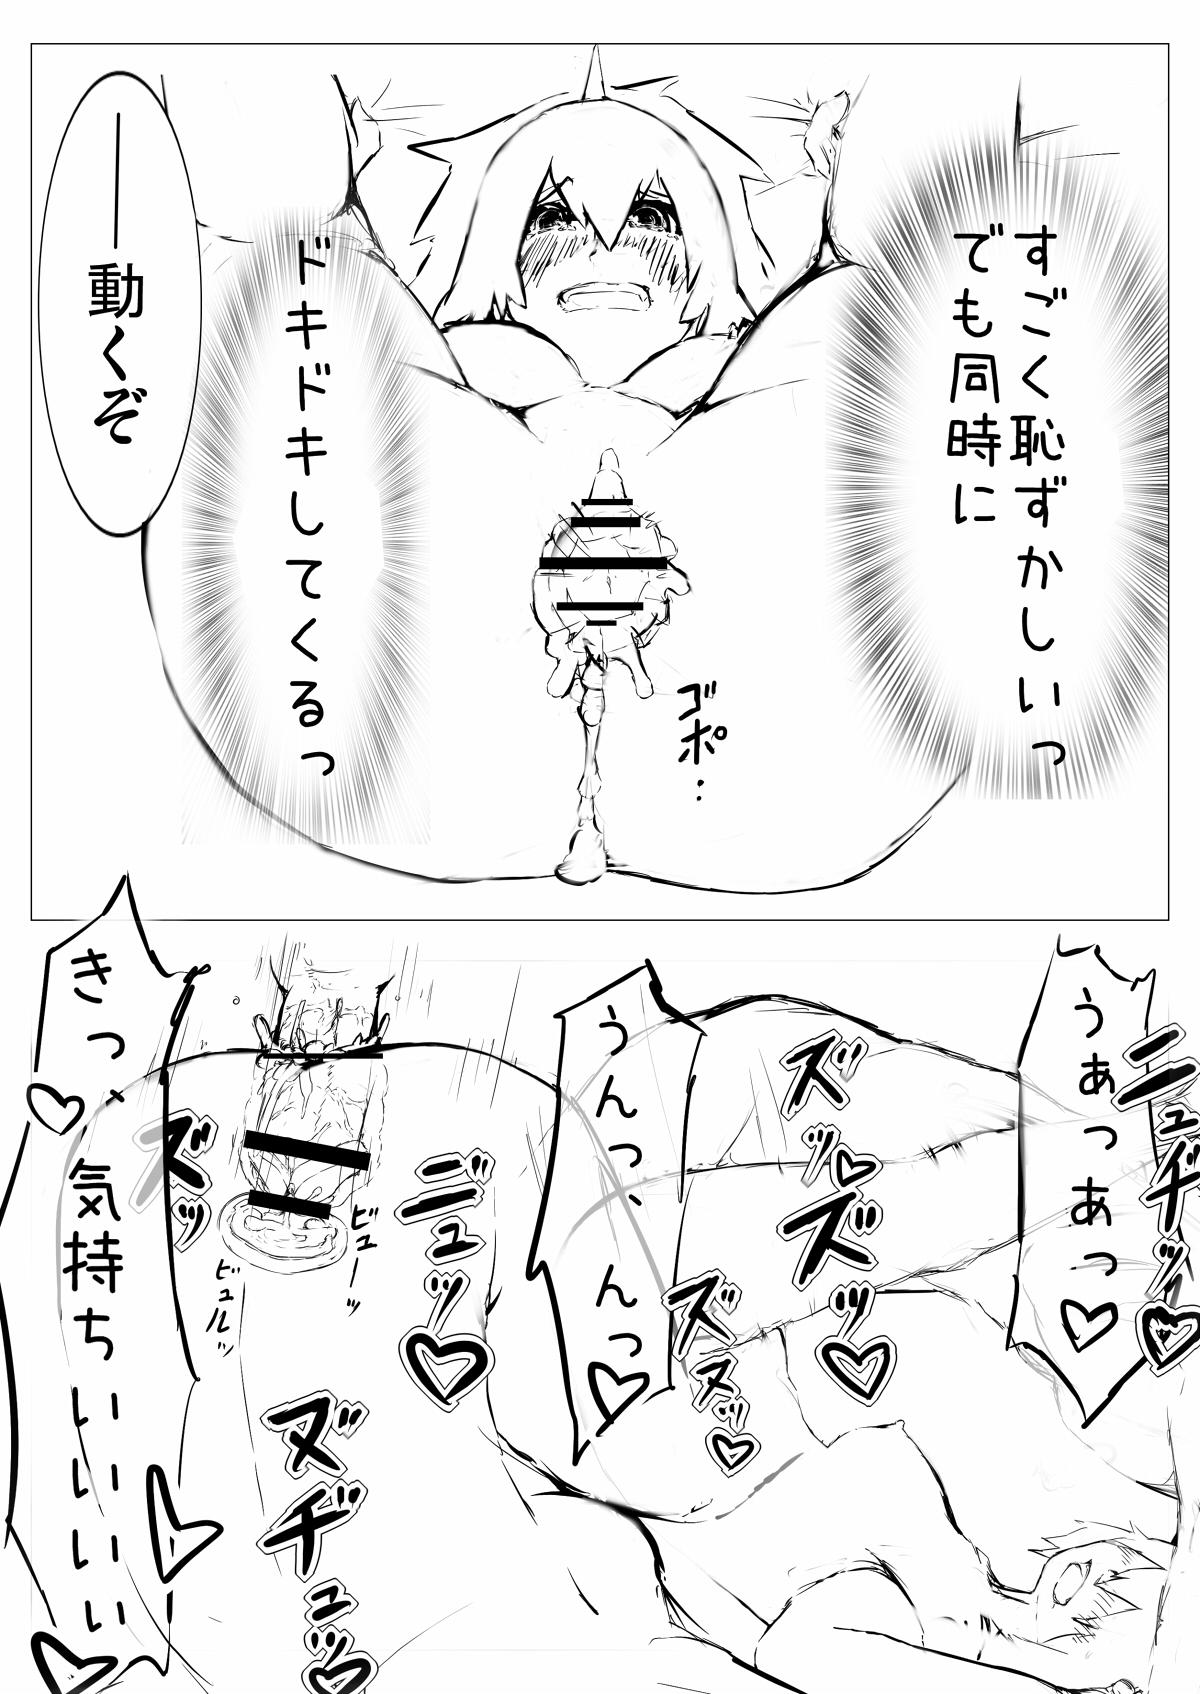 Vaginal 低難度：キリンを捕らえて参れ！ - Monster hunter Indian Sex - Page 24